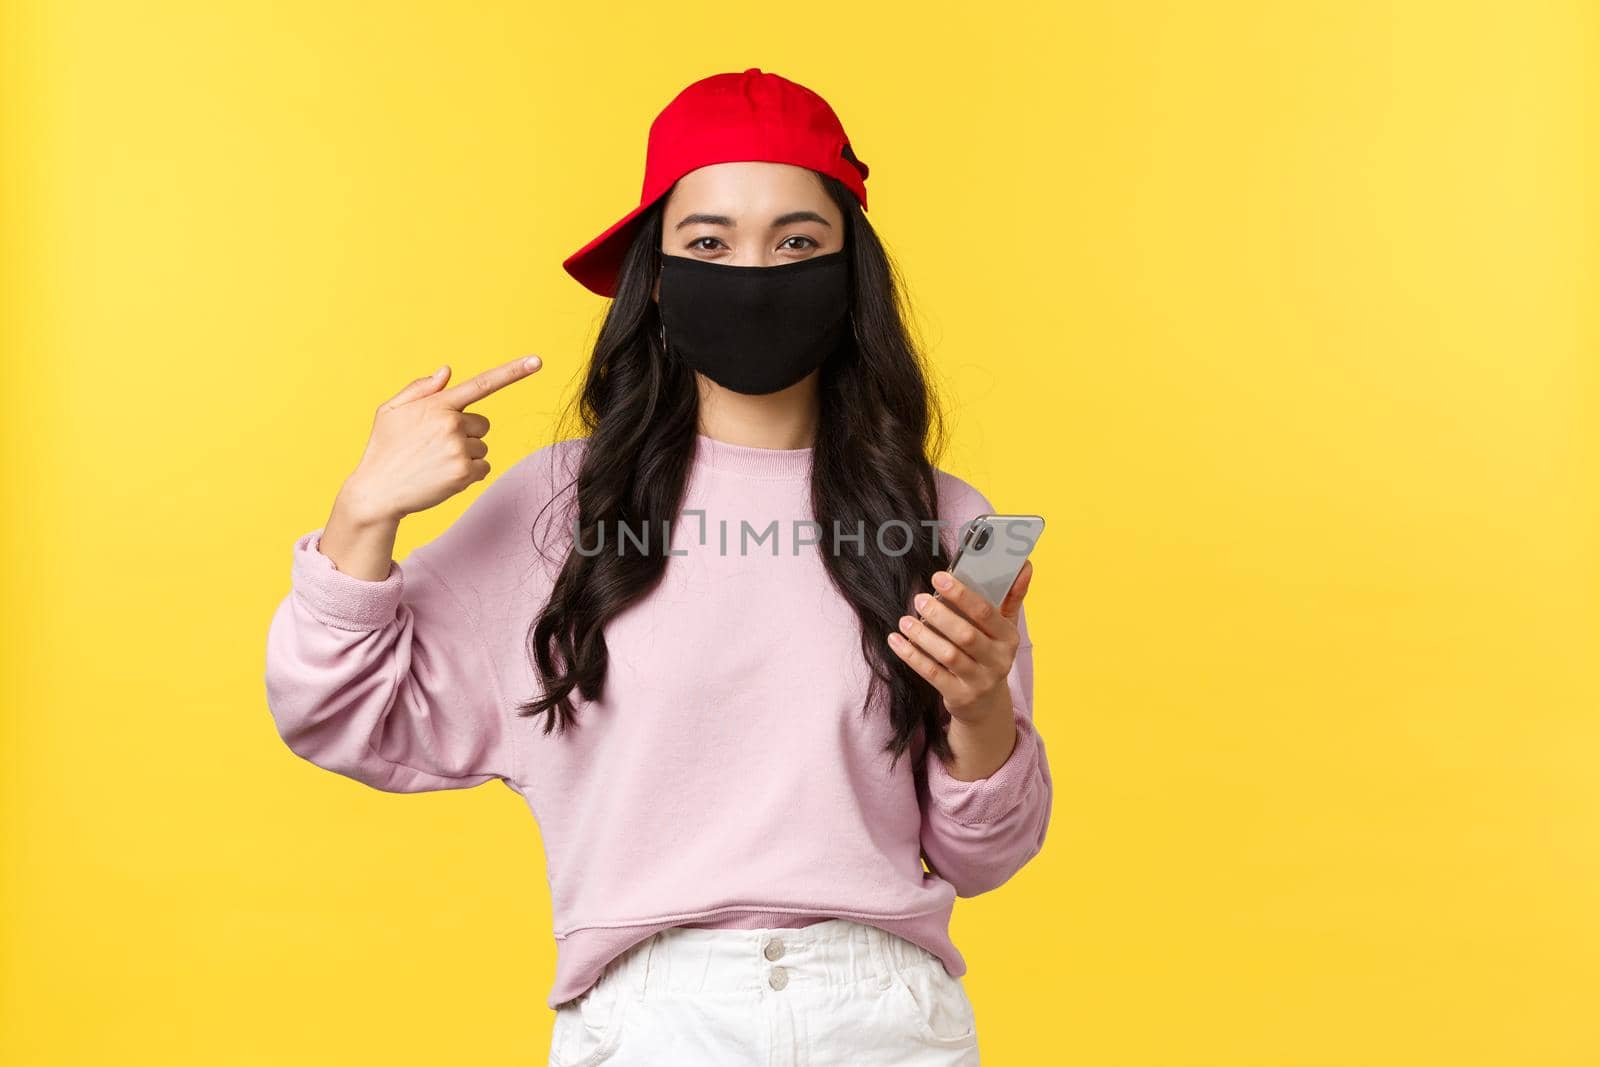 Covid-19, social-distancing lifestyle, prevent virus spread concept. Smiling cute asian girl pointing at face mask, asking protect health during coronavirus, holding mobile phone, yellow background.